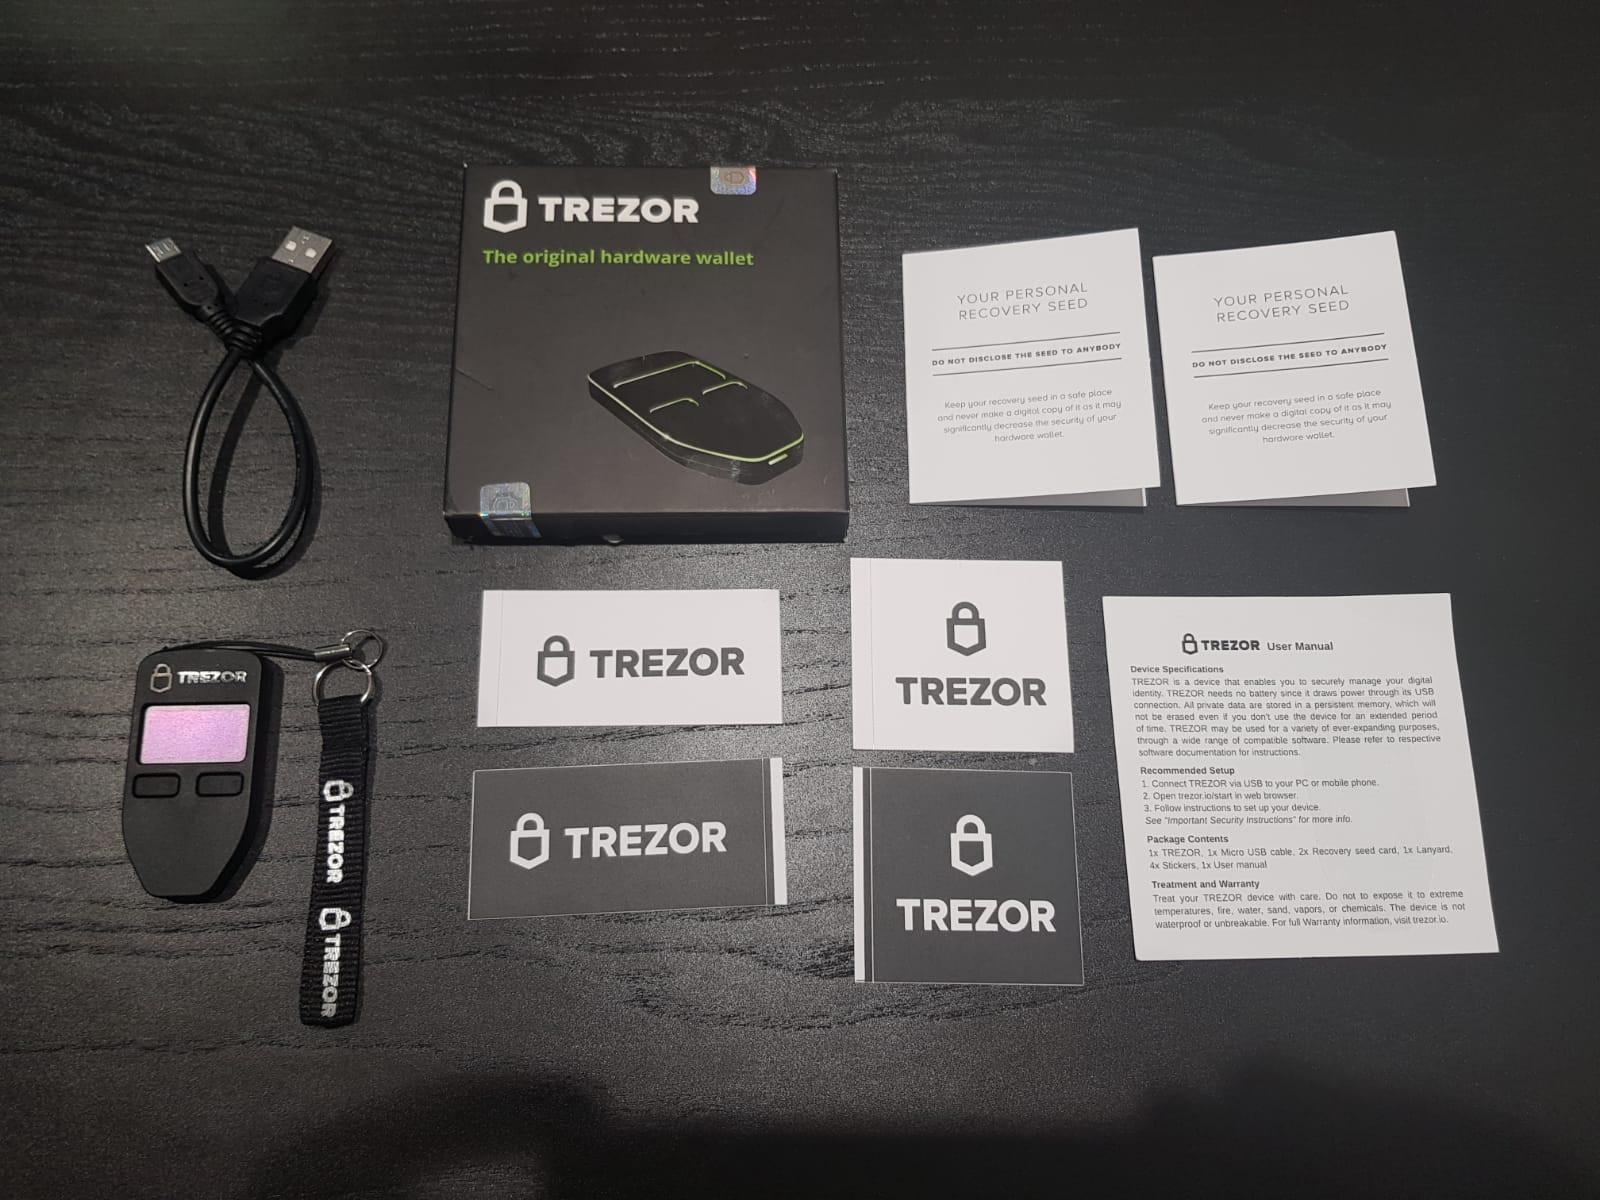 A simple guide to set up your TREZOR One wallet - Genesis Block